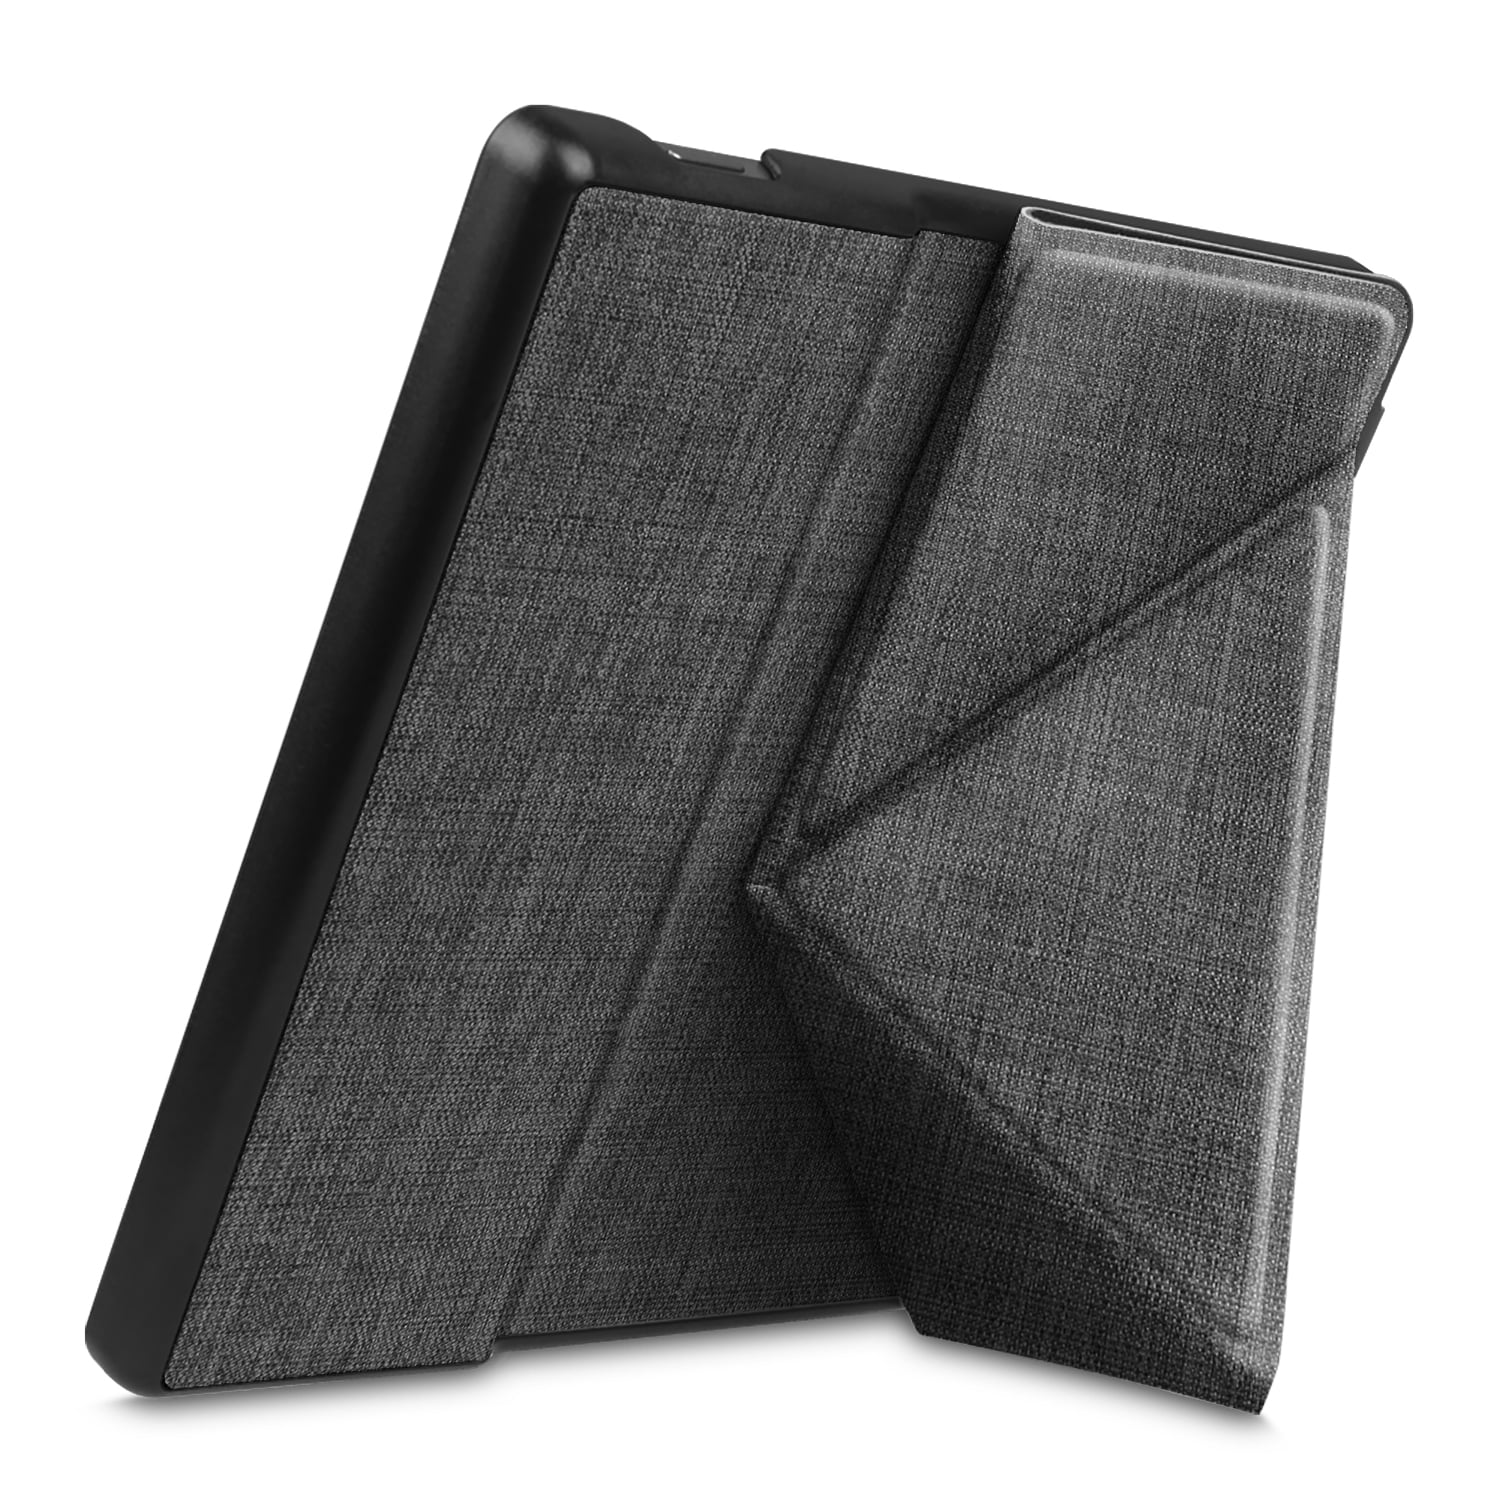 - Slim Fit Stand Cover Support Hands Free Reading with Auto Wake Sleep 10th Generation, 2019 Release and 9th Generation, 2017 Release Fintie Origami Case for All-New Kindle Oasis Library 